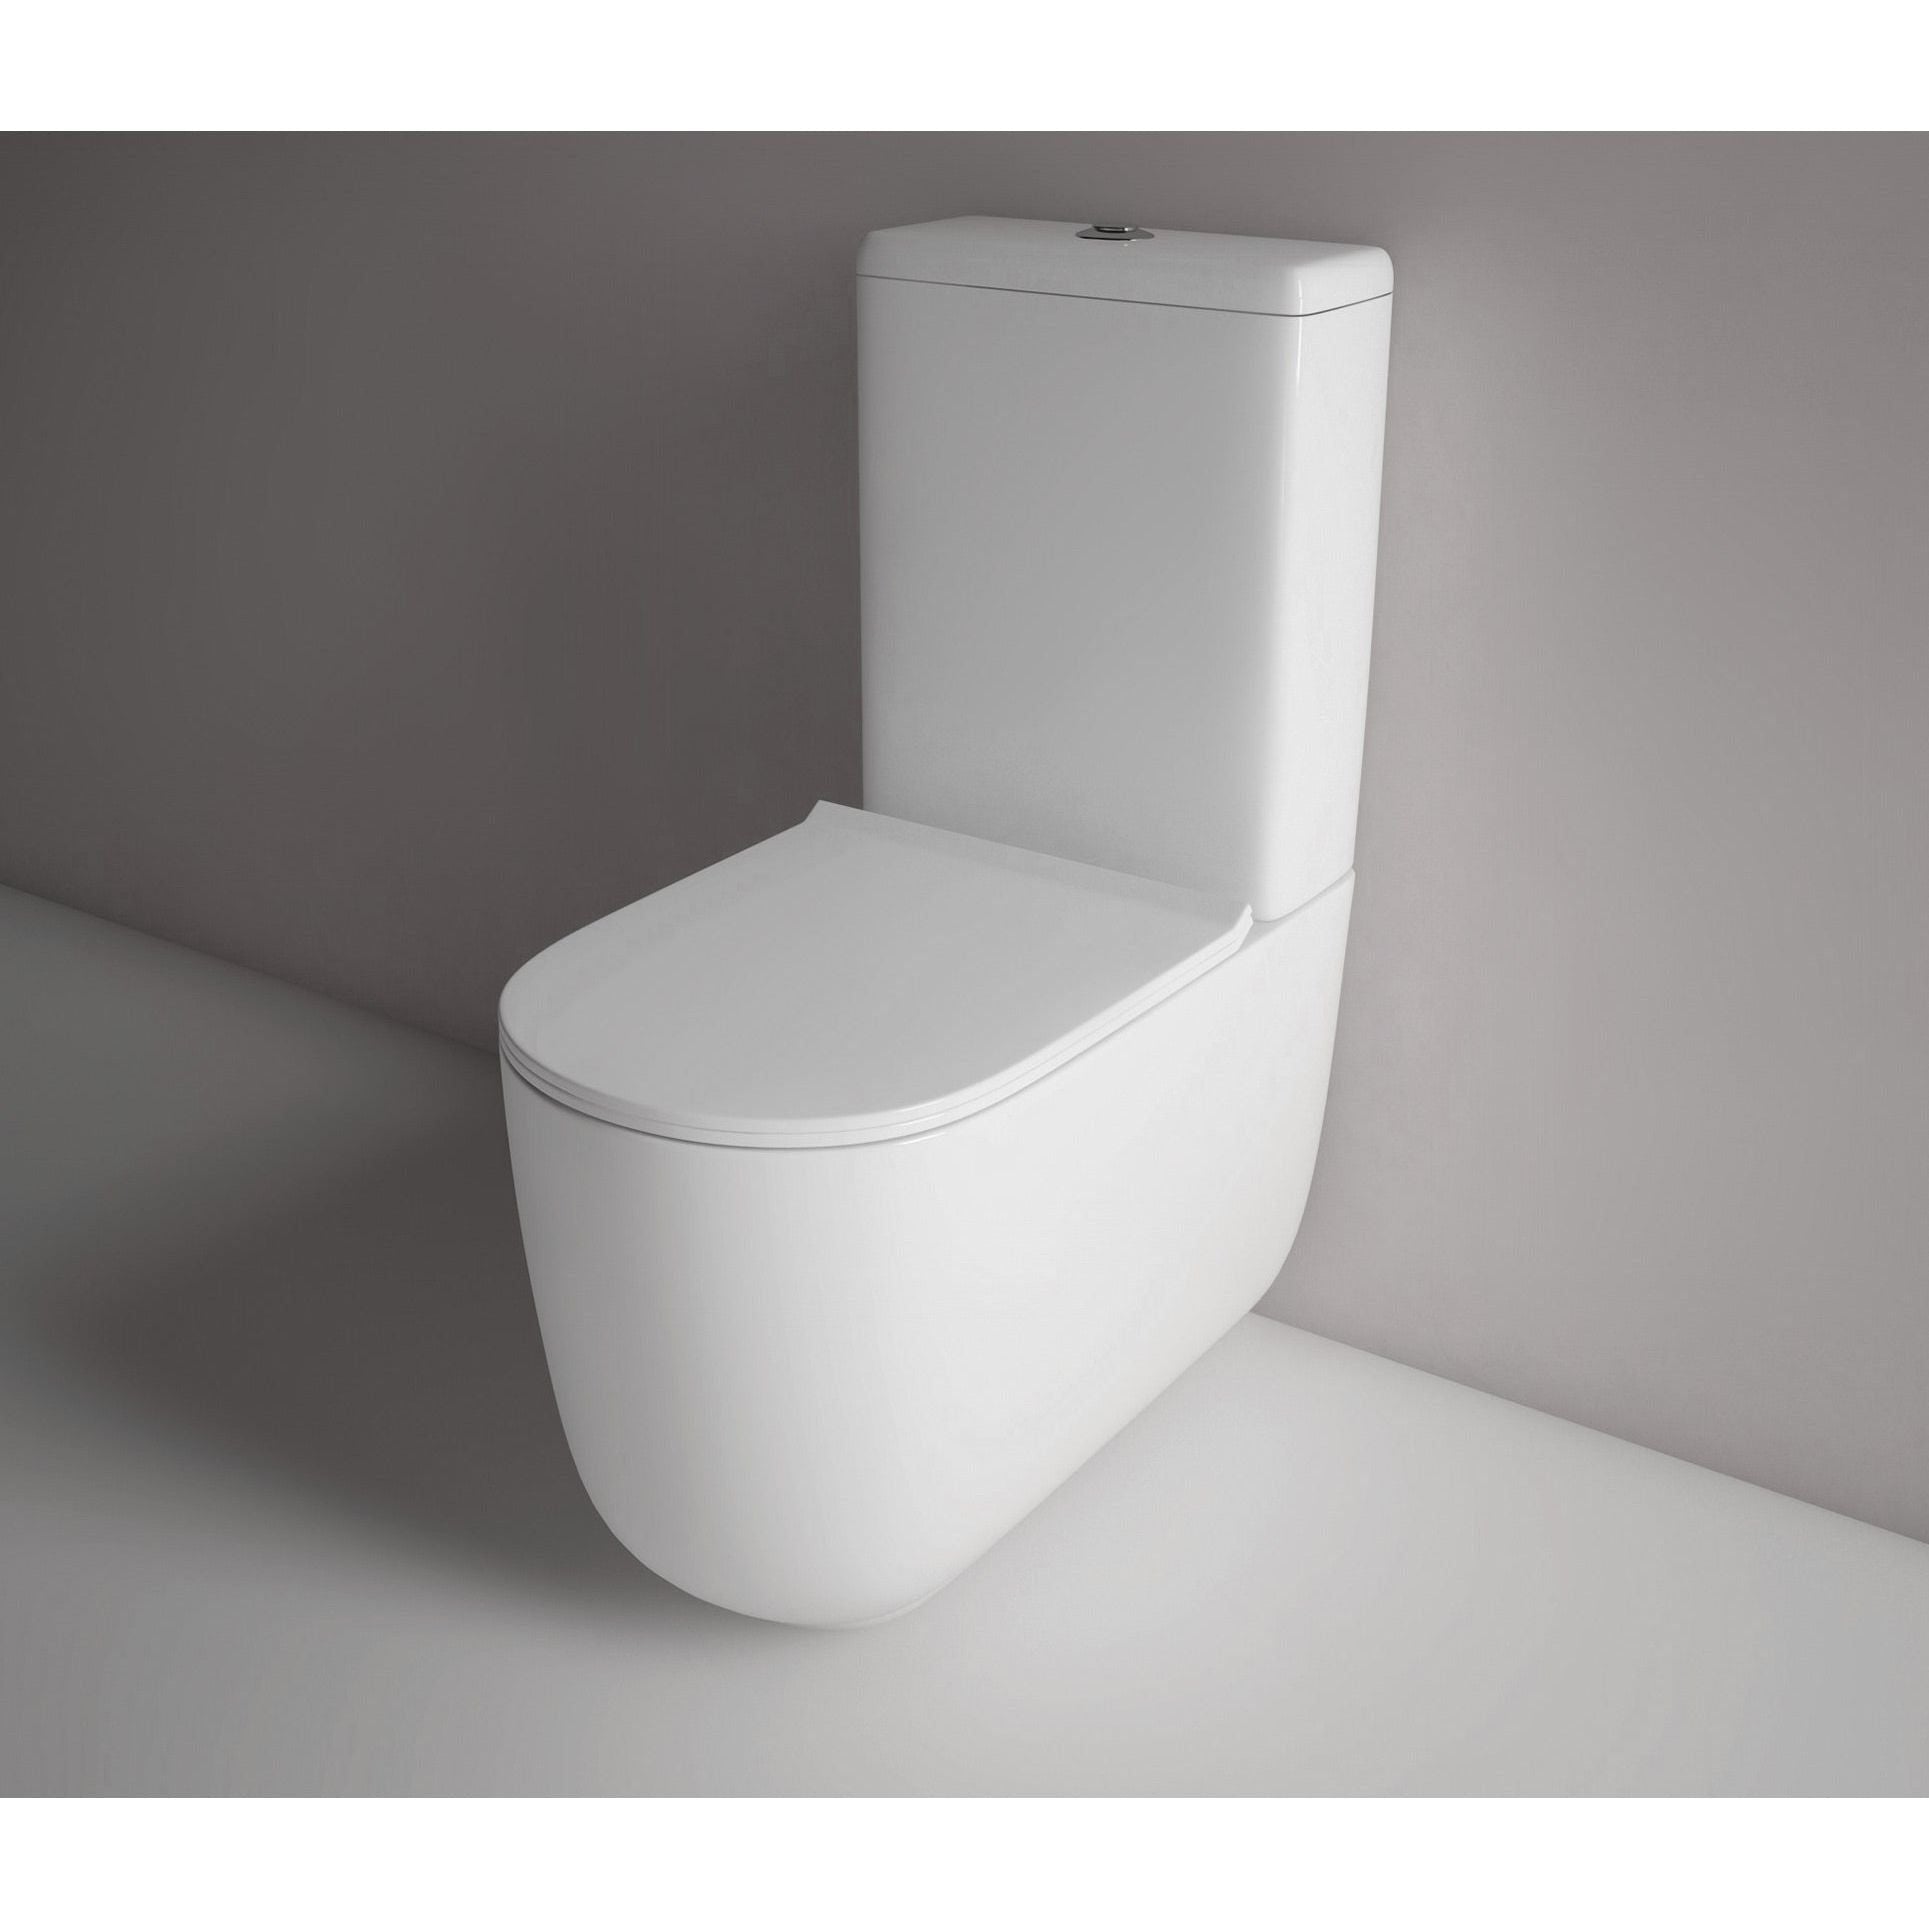 Studio Bagno Milady rimless back to wall suite